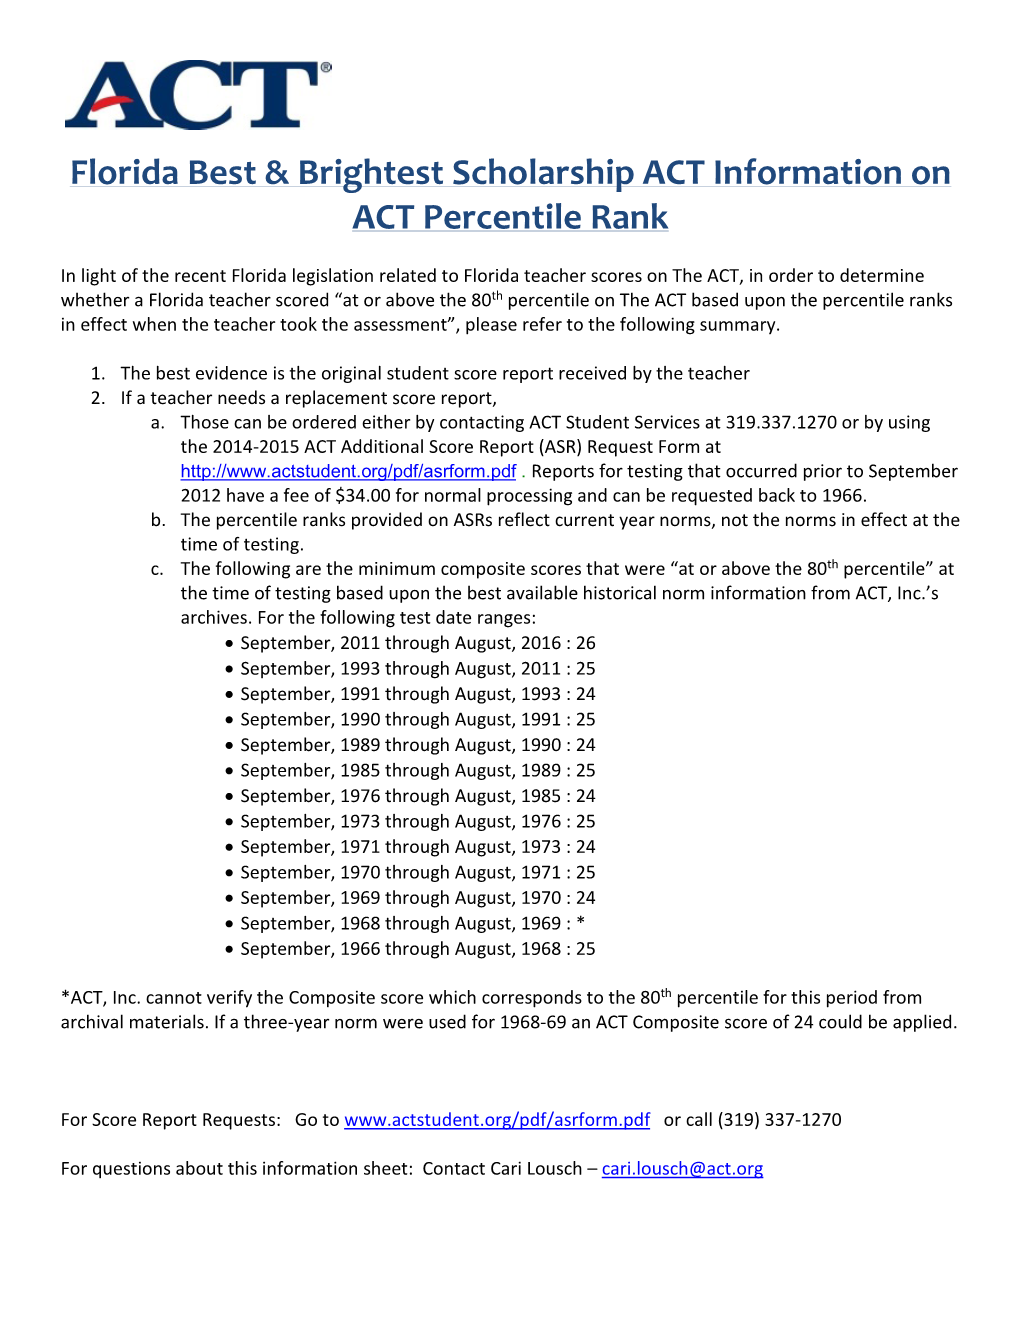 Florida Best and Brightest Scholarship ACT Information on ACT Percentile